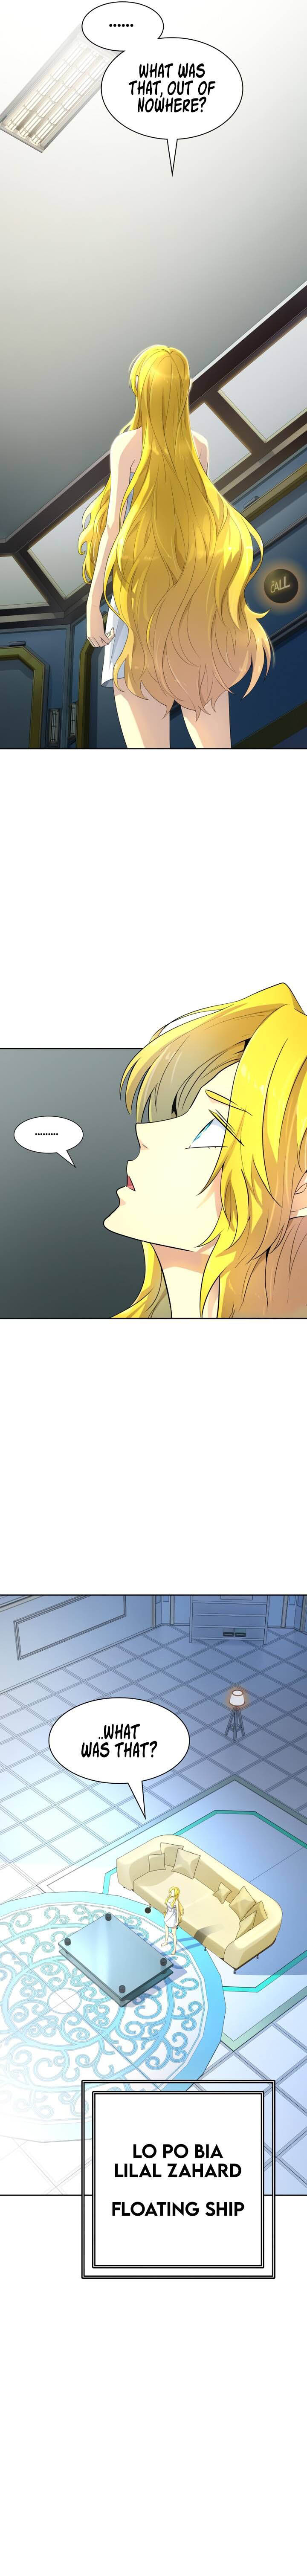 Tower Of God 544 20